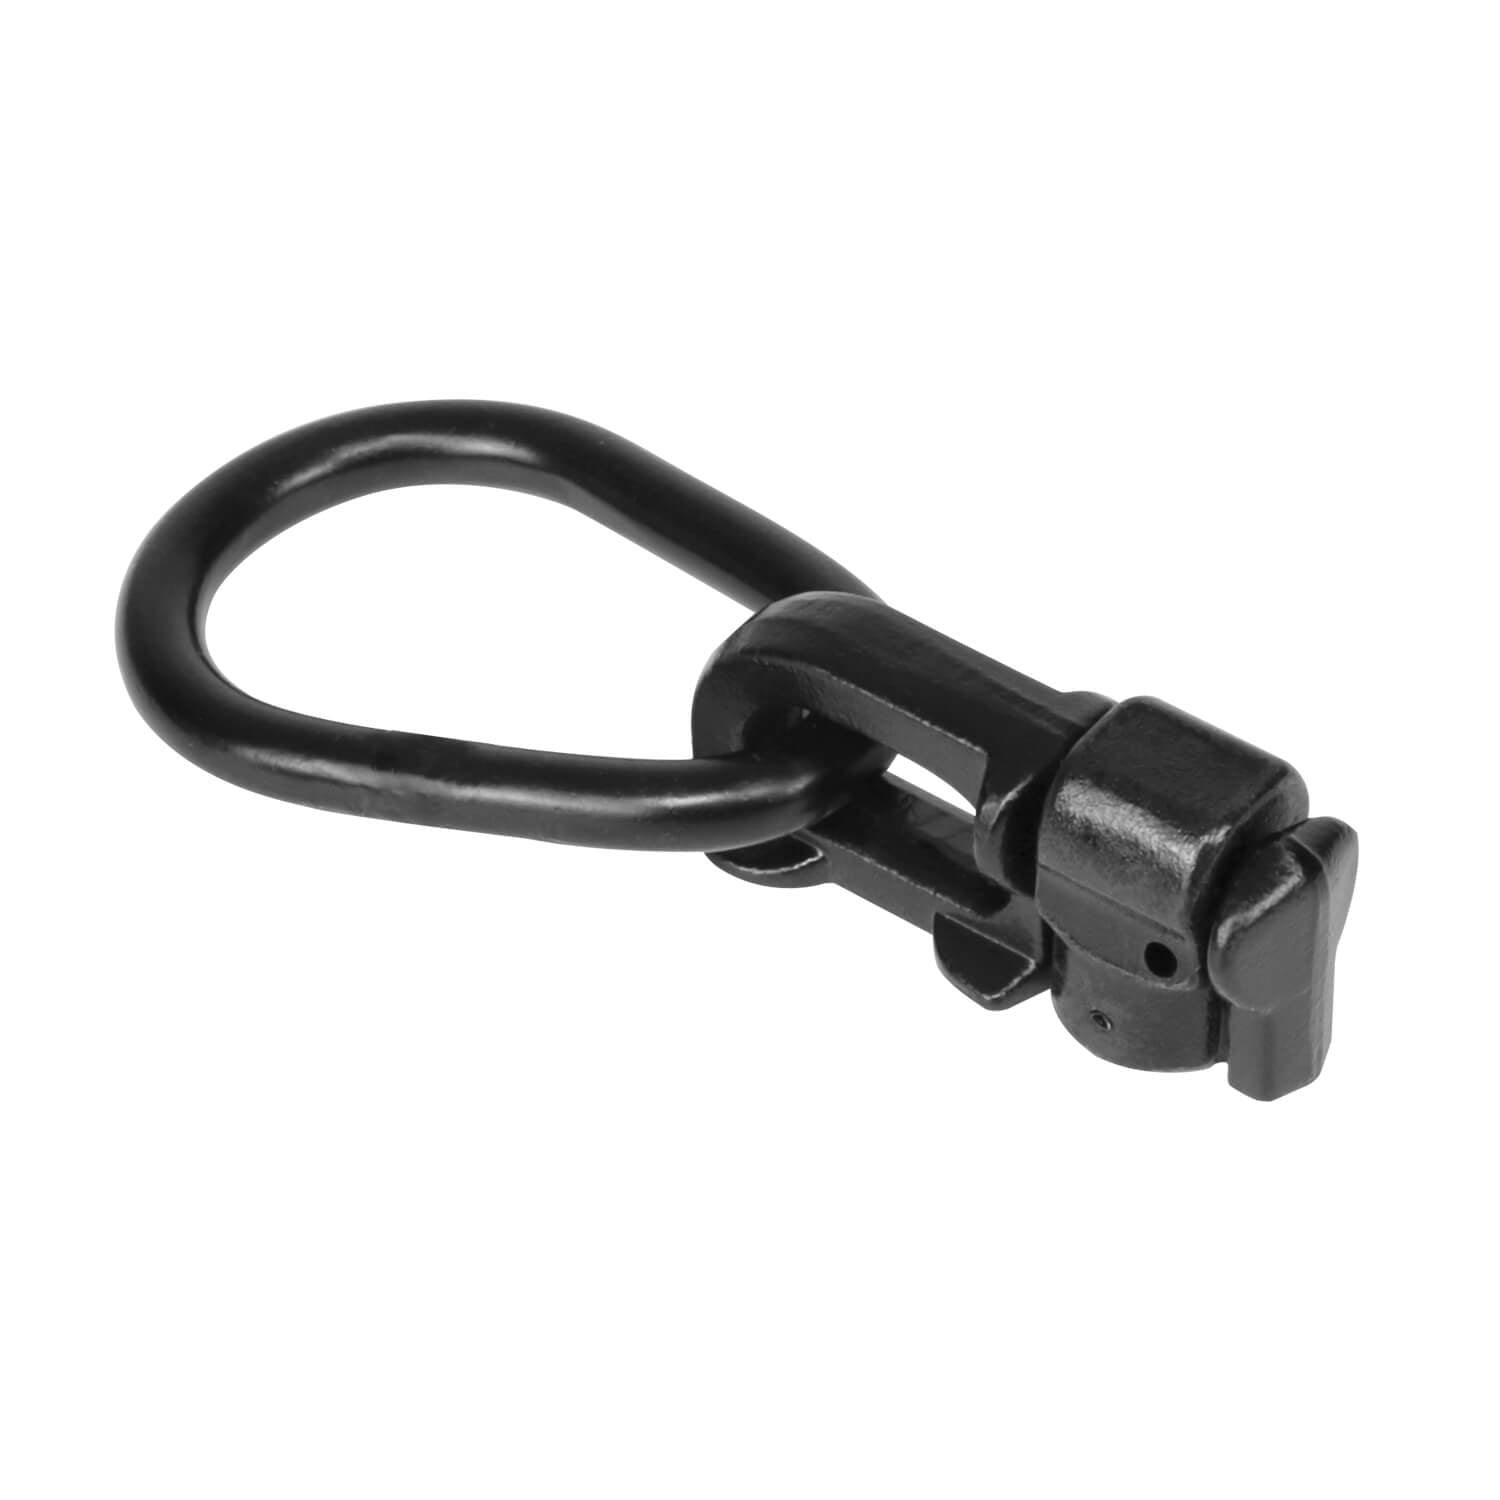 L-Track Double Stud Tie Down Fitting with Pear Link